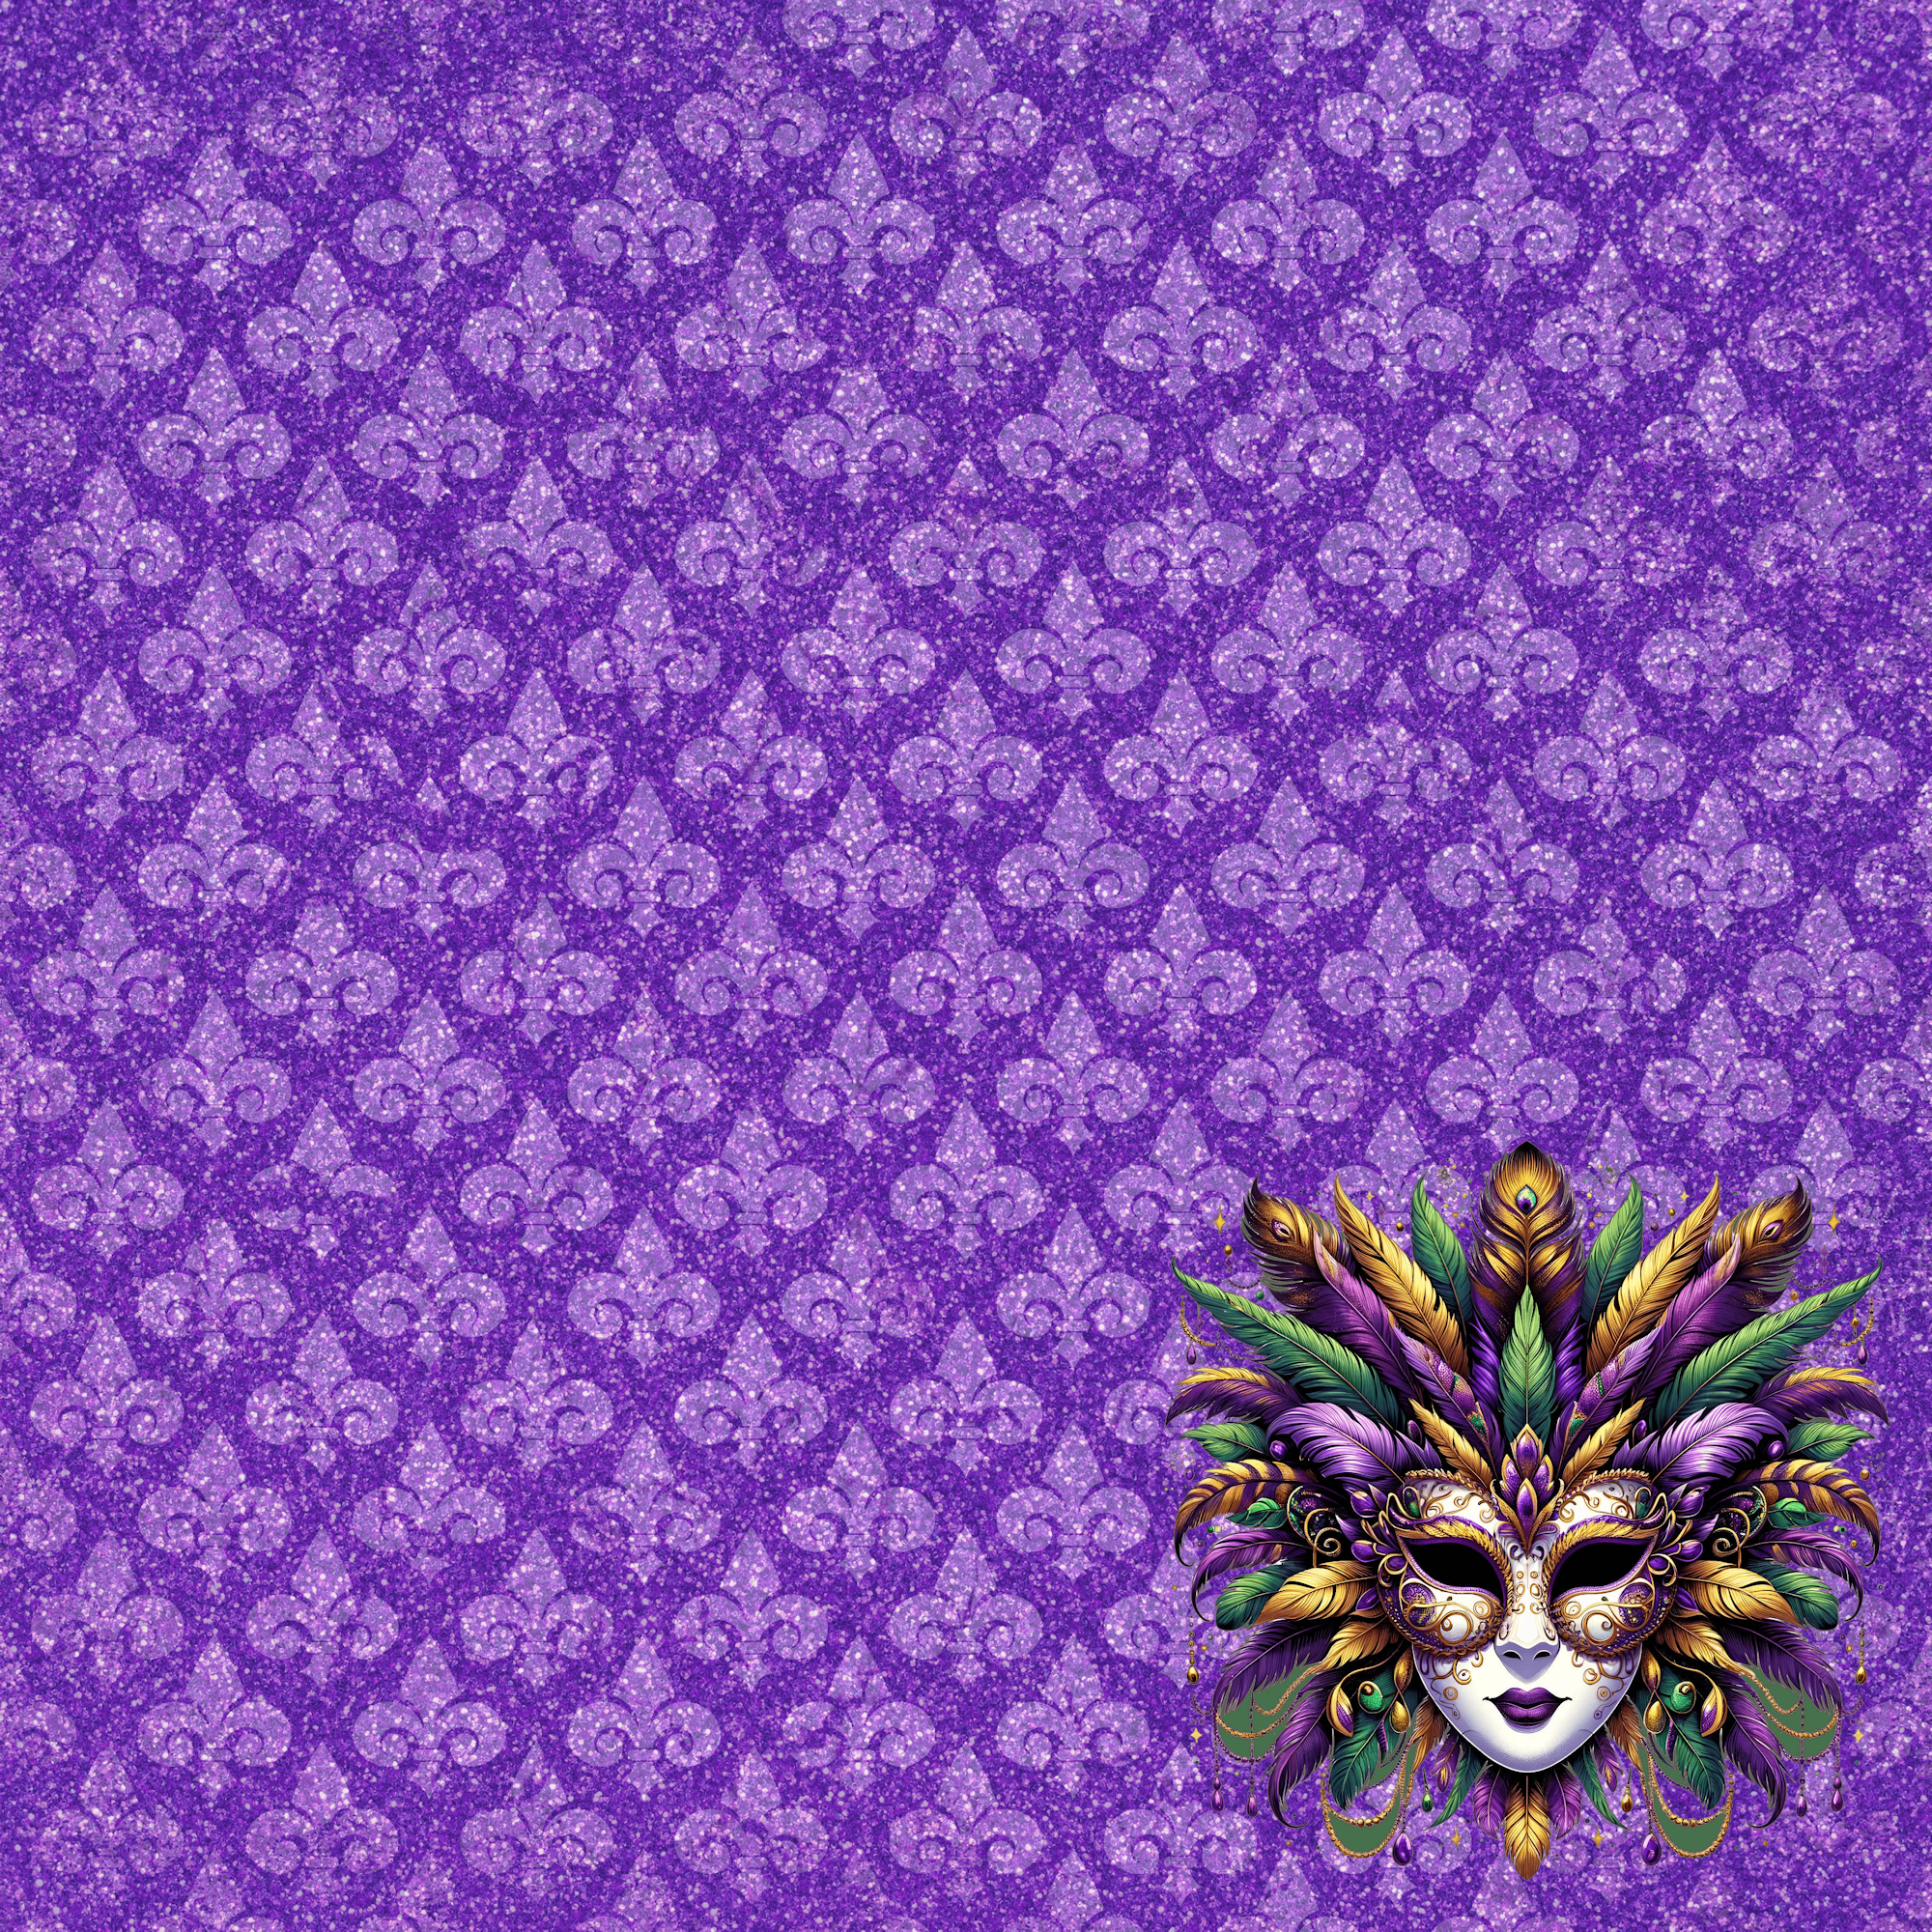 Mardi Gras Party Collection Mask Up 12 x 12 Double-Sided Scrapbook Paper by SSC Designs